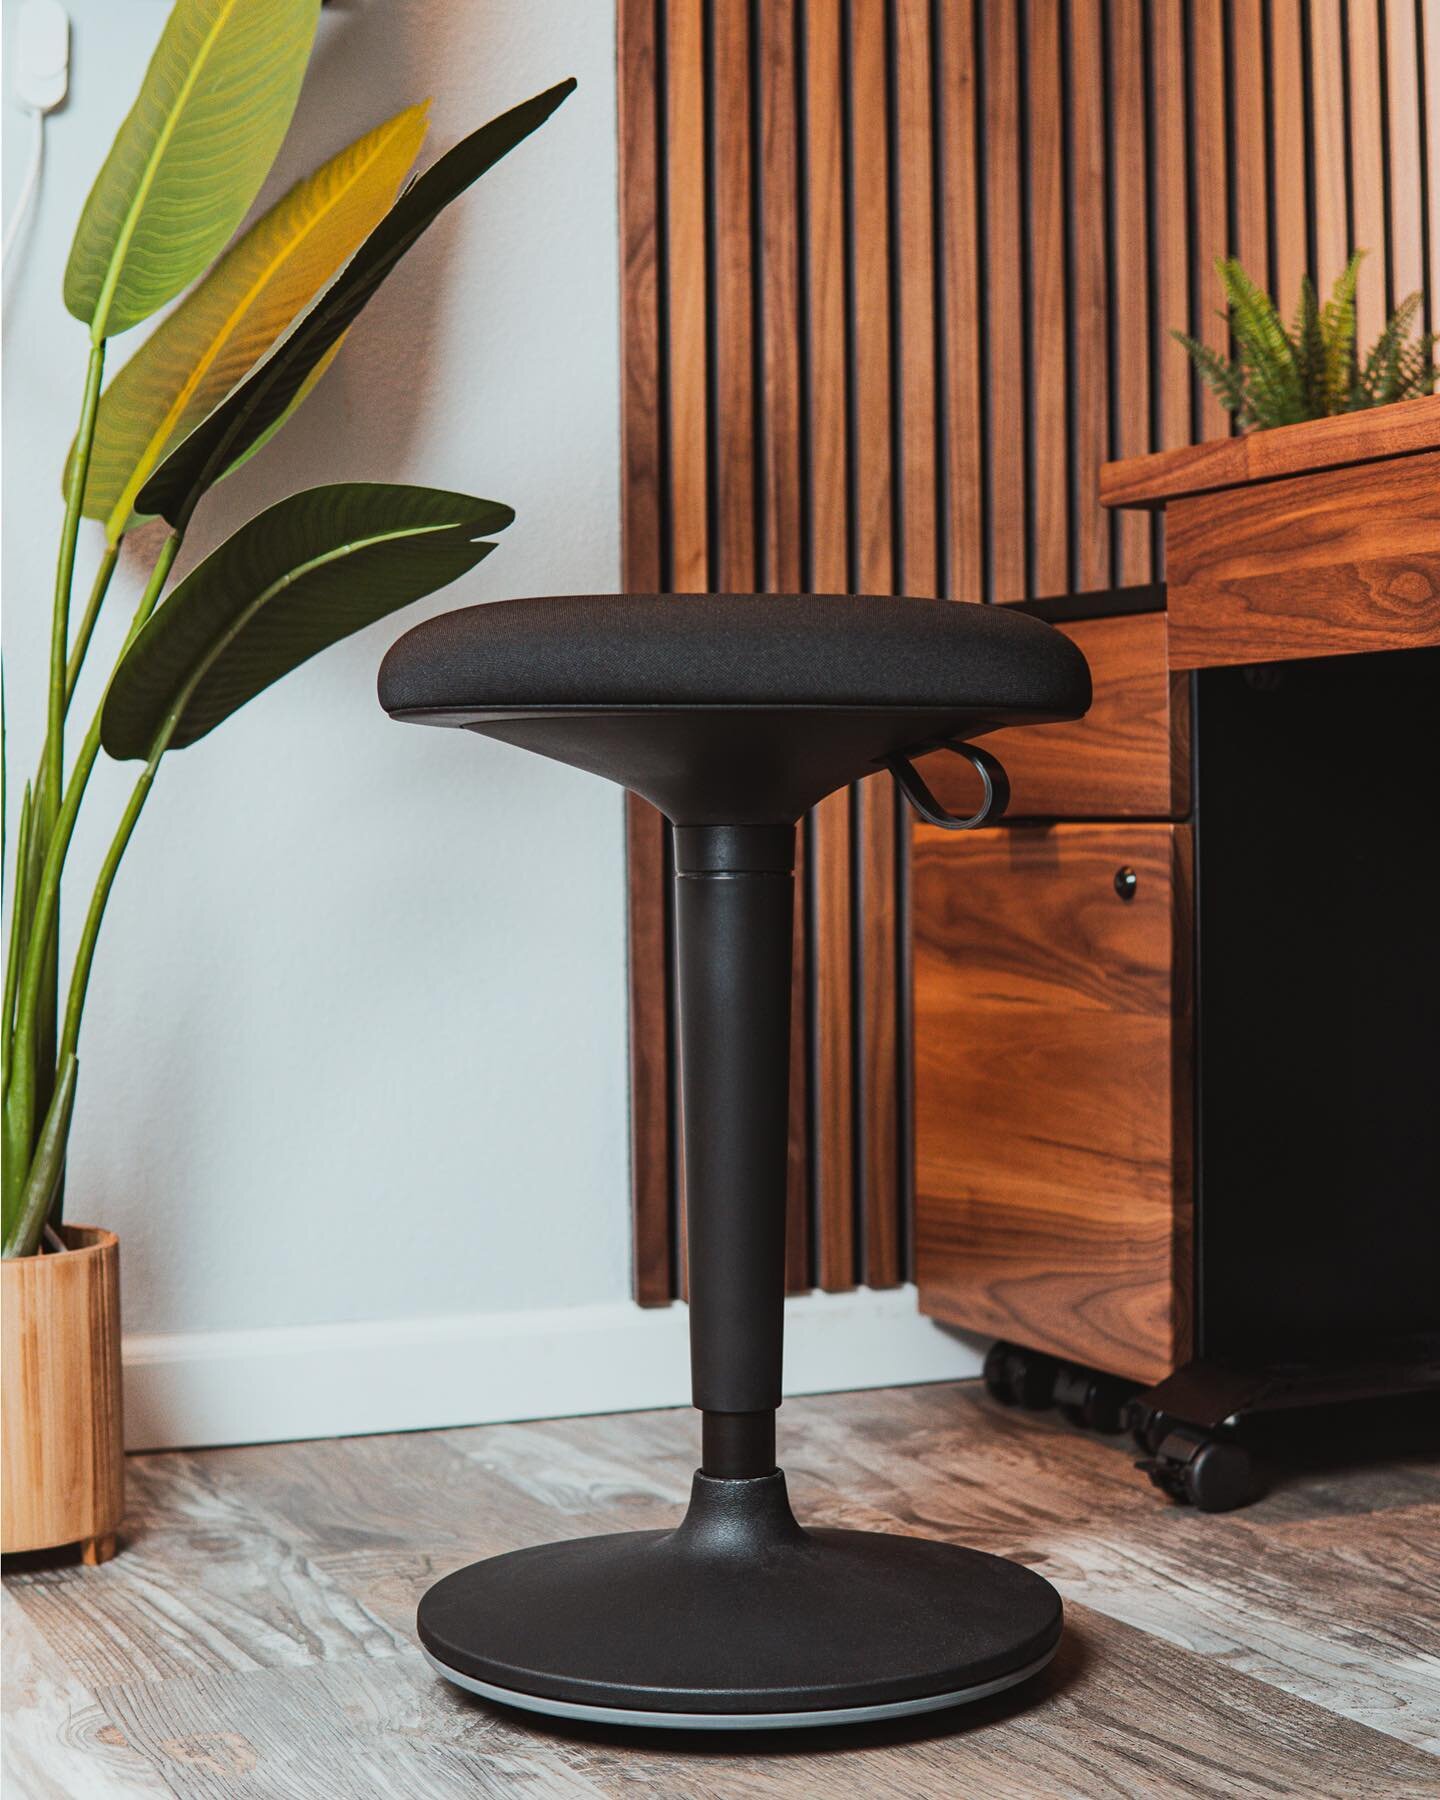 A stool designed to keep you moving 🏃🏽

I&rsquo;m filming a video on accessories that will elevate your home office experience which should go live next Friday. 😁

One of the products will be this new Tilt Stool from @ergonofis . It&rsquo;s design